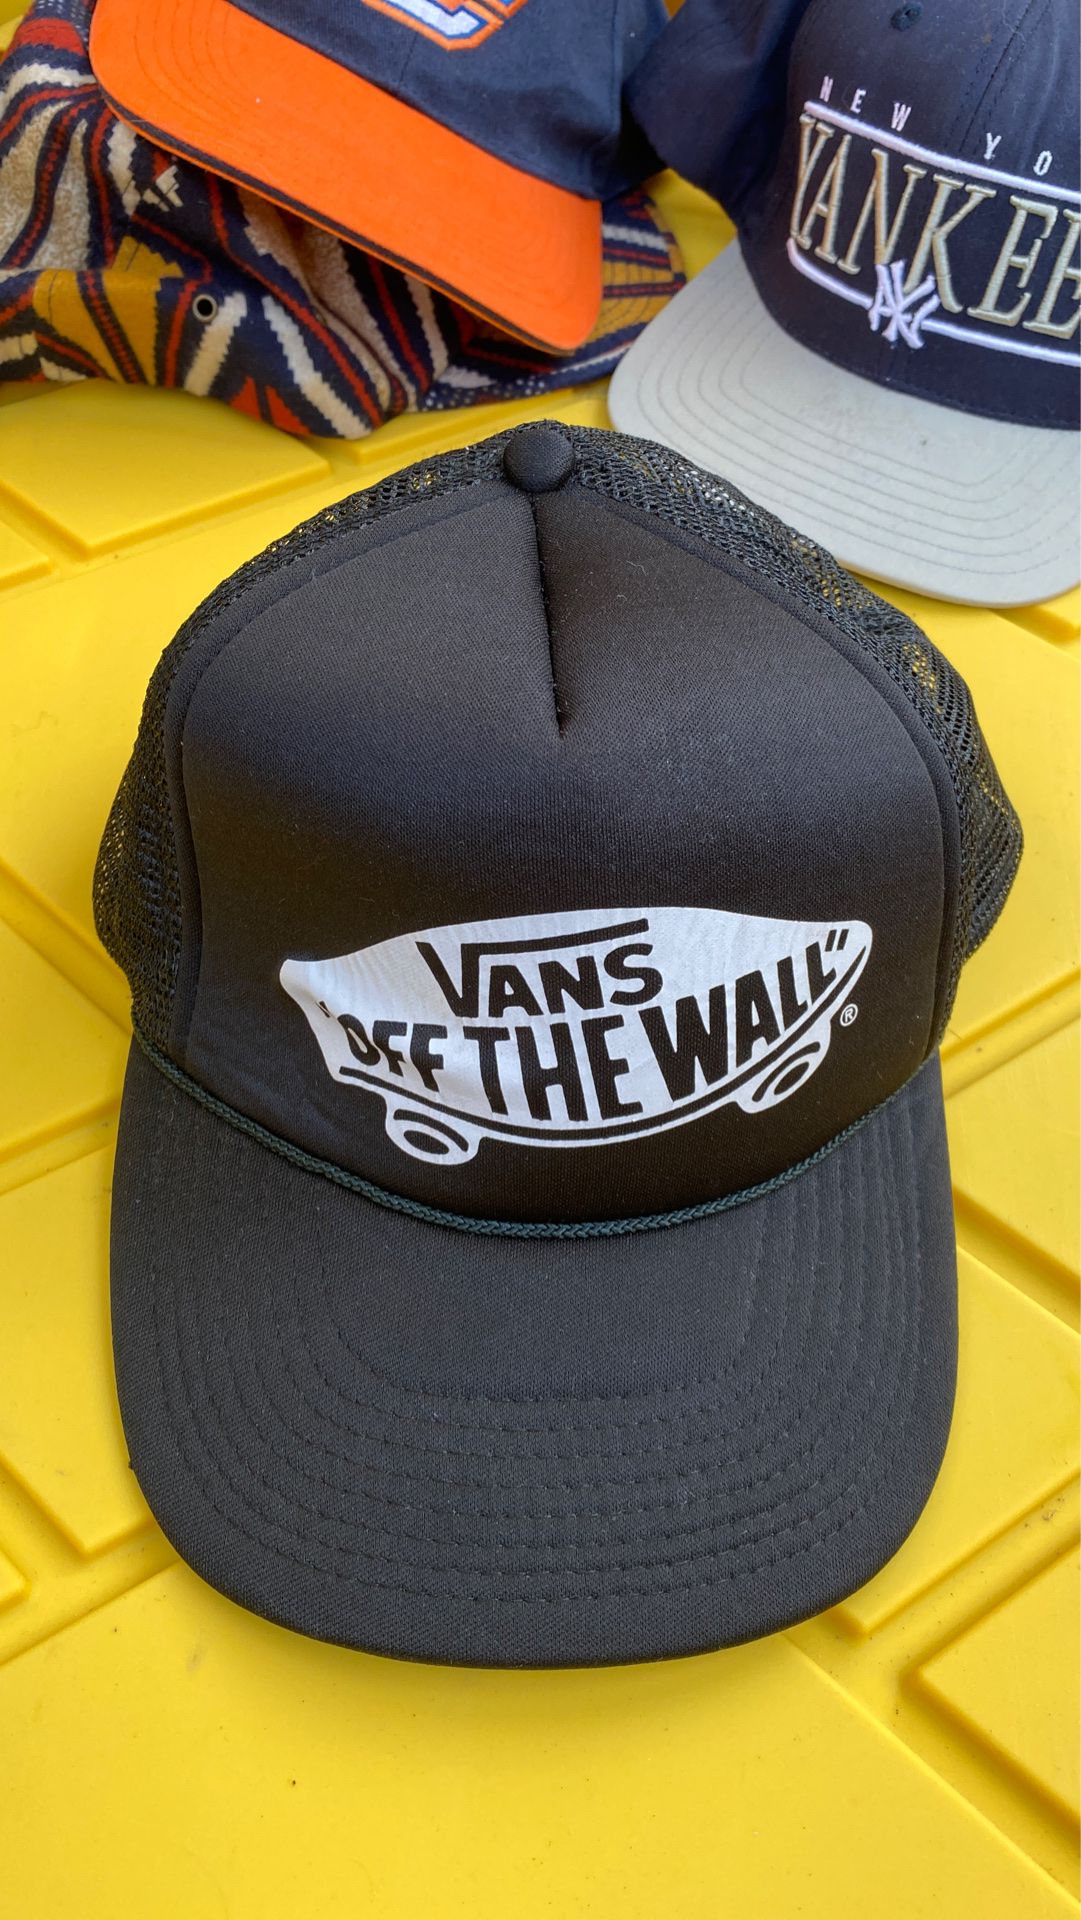 Vans Off the Wall hat $5